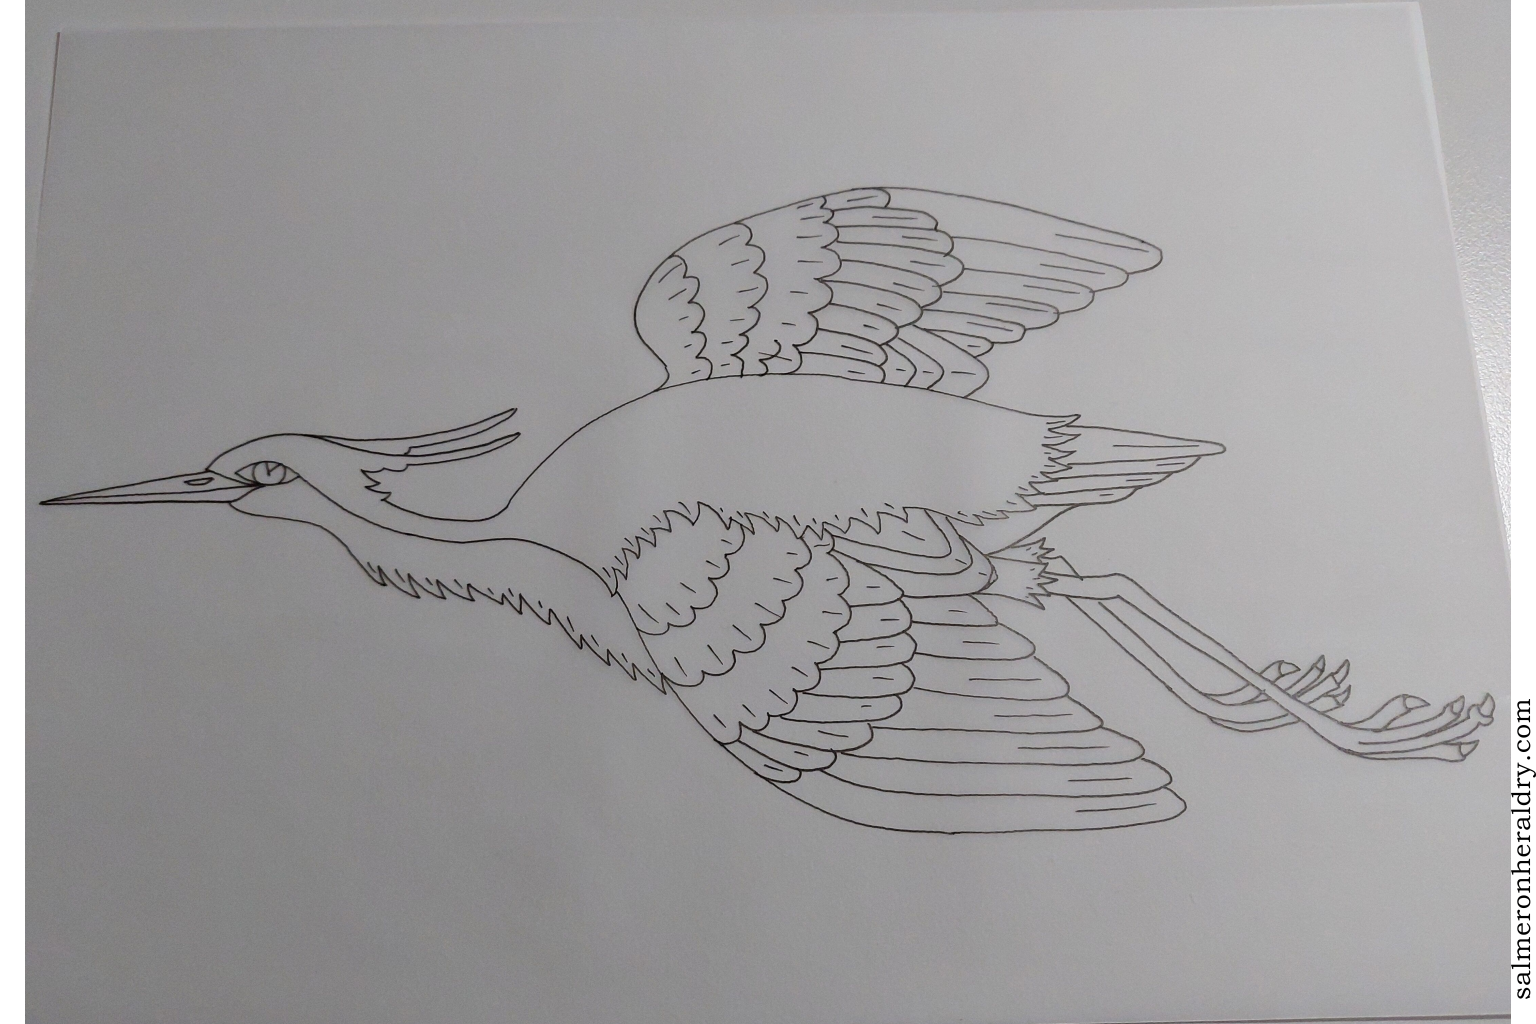 A heron volant drew by me for the canting arms of Paul and Kari Herndon's family.